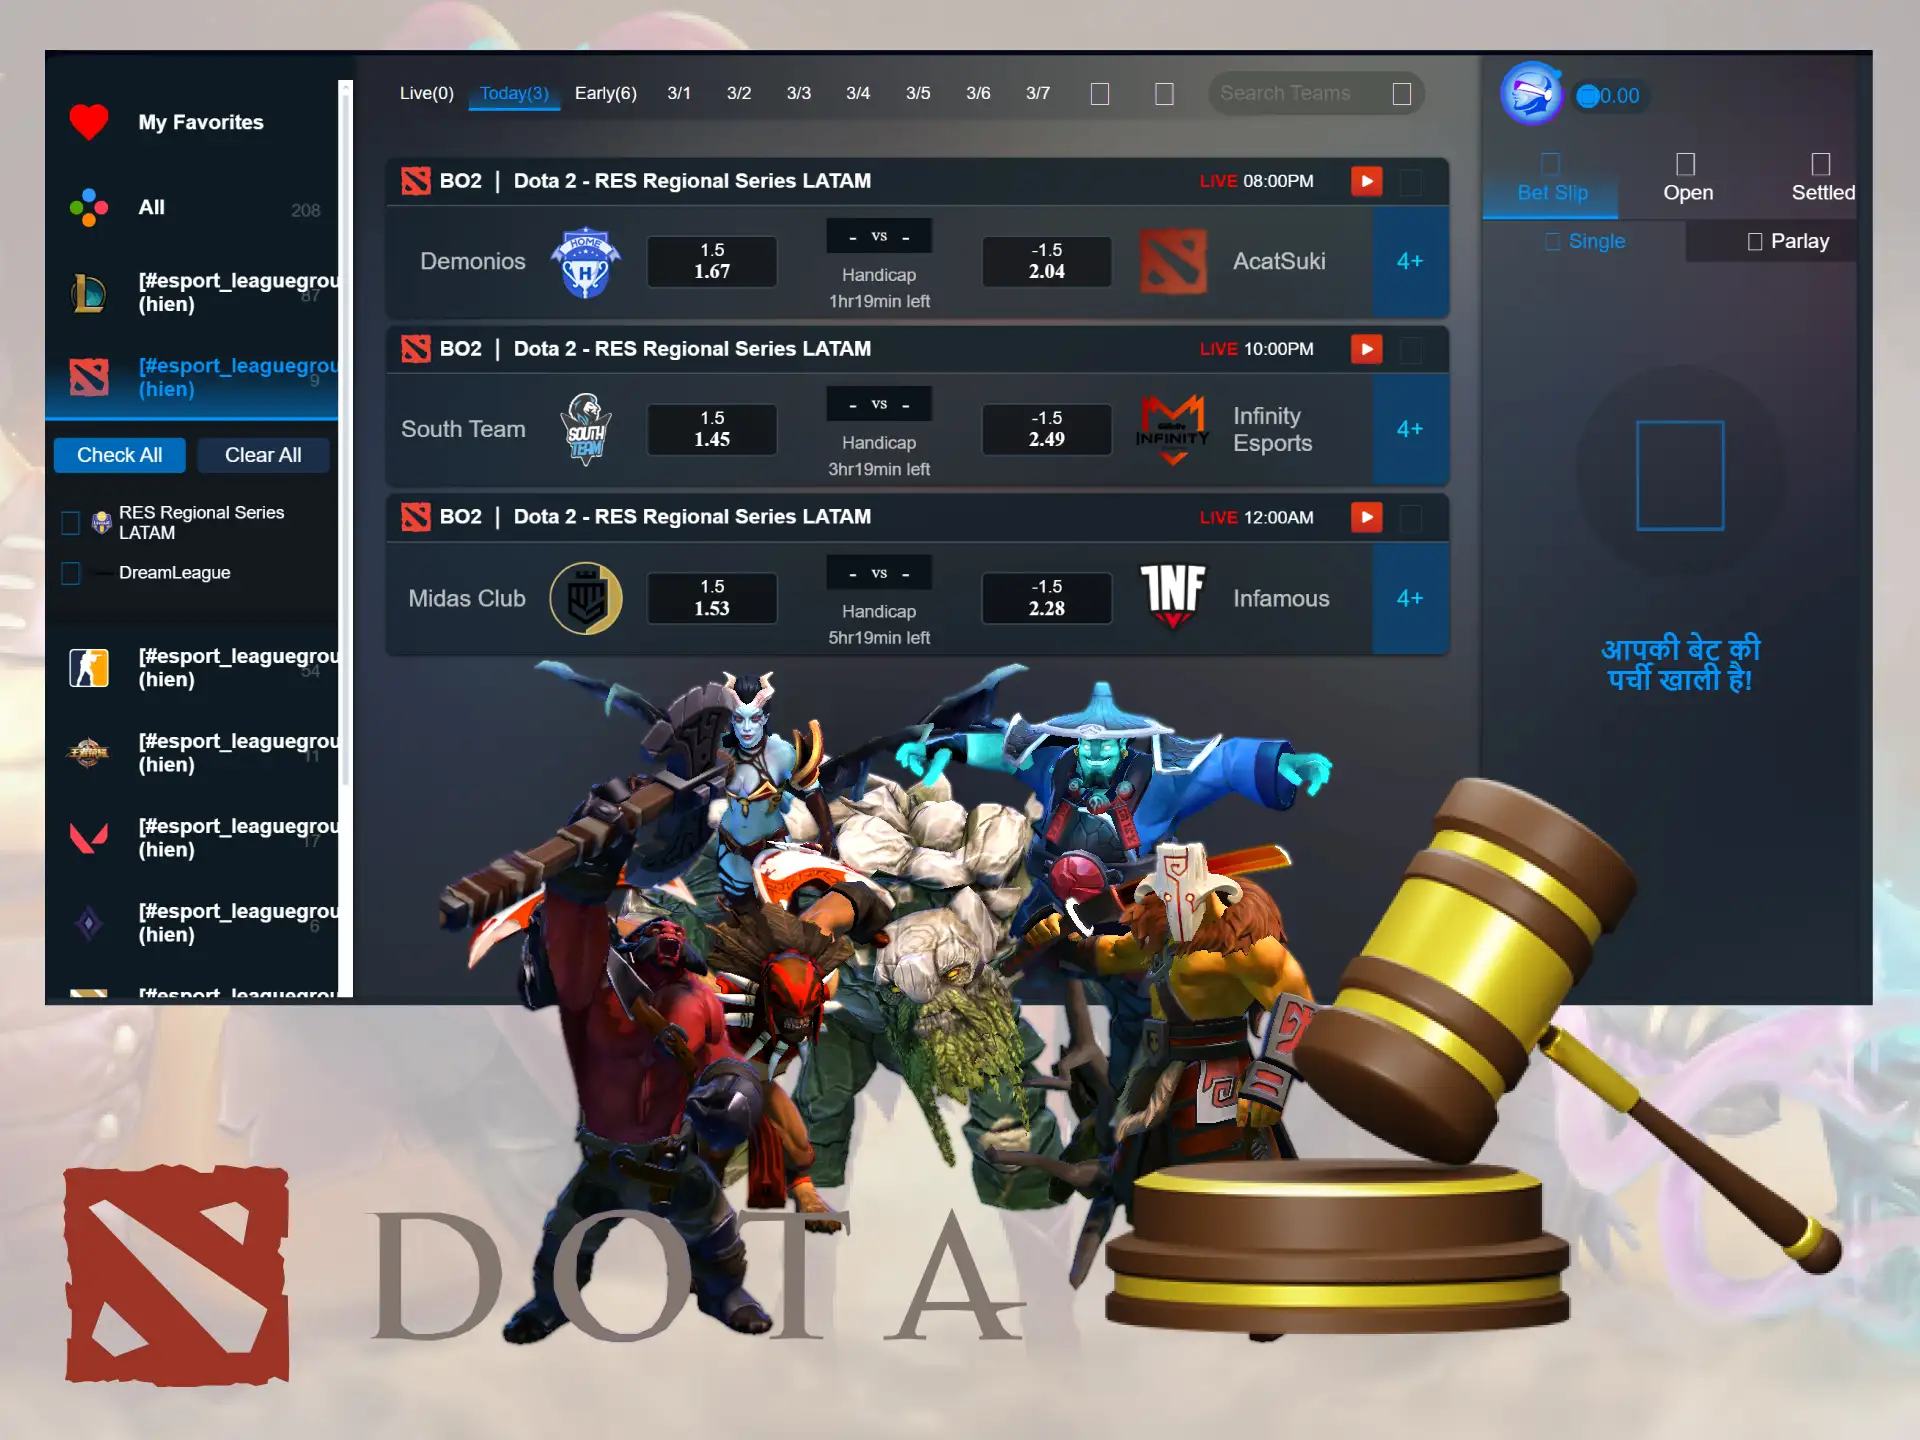 Betting on Dota 2 is possible due to the presence of an international betting license.